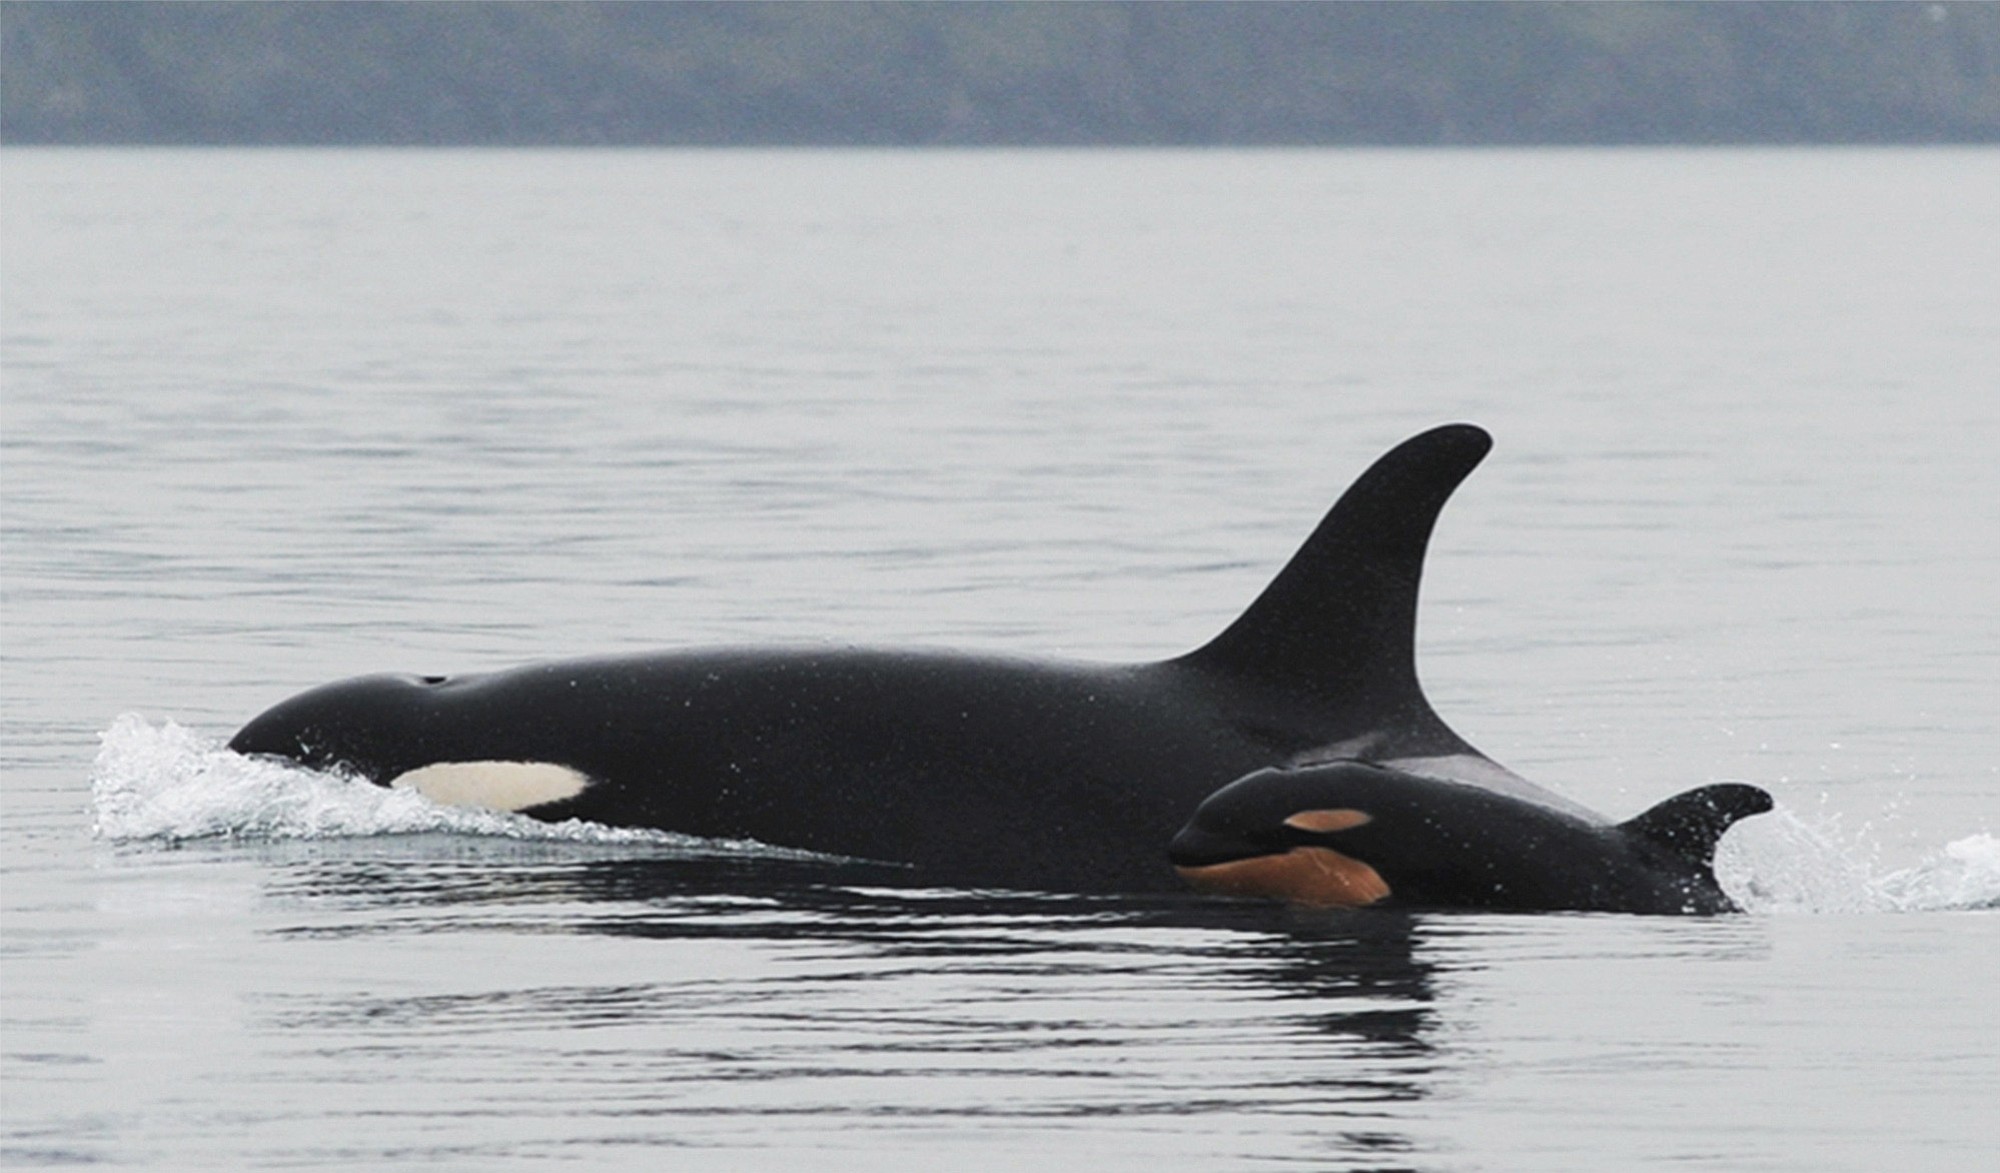 A new orca whale calf known as J-51 swims with J-19, who is believed to be its mother, near San Juan Island.